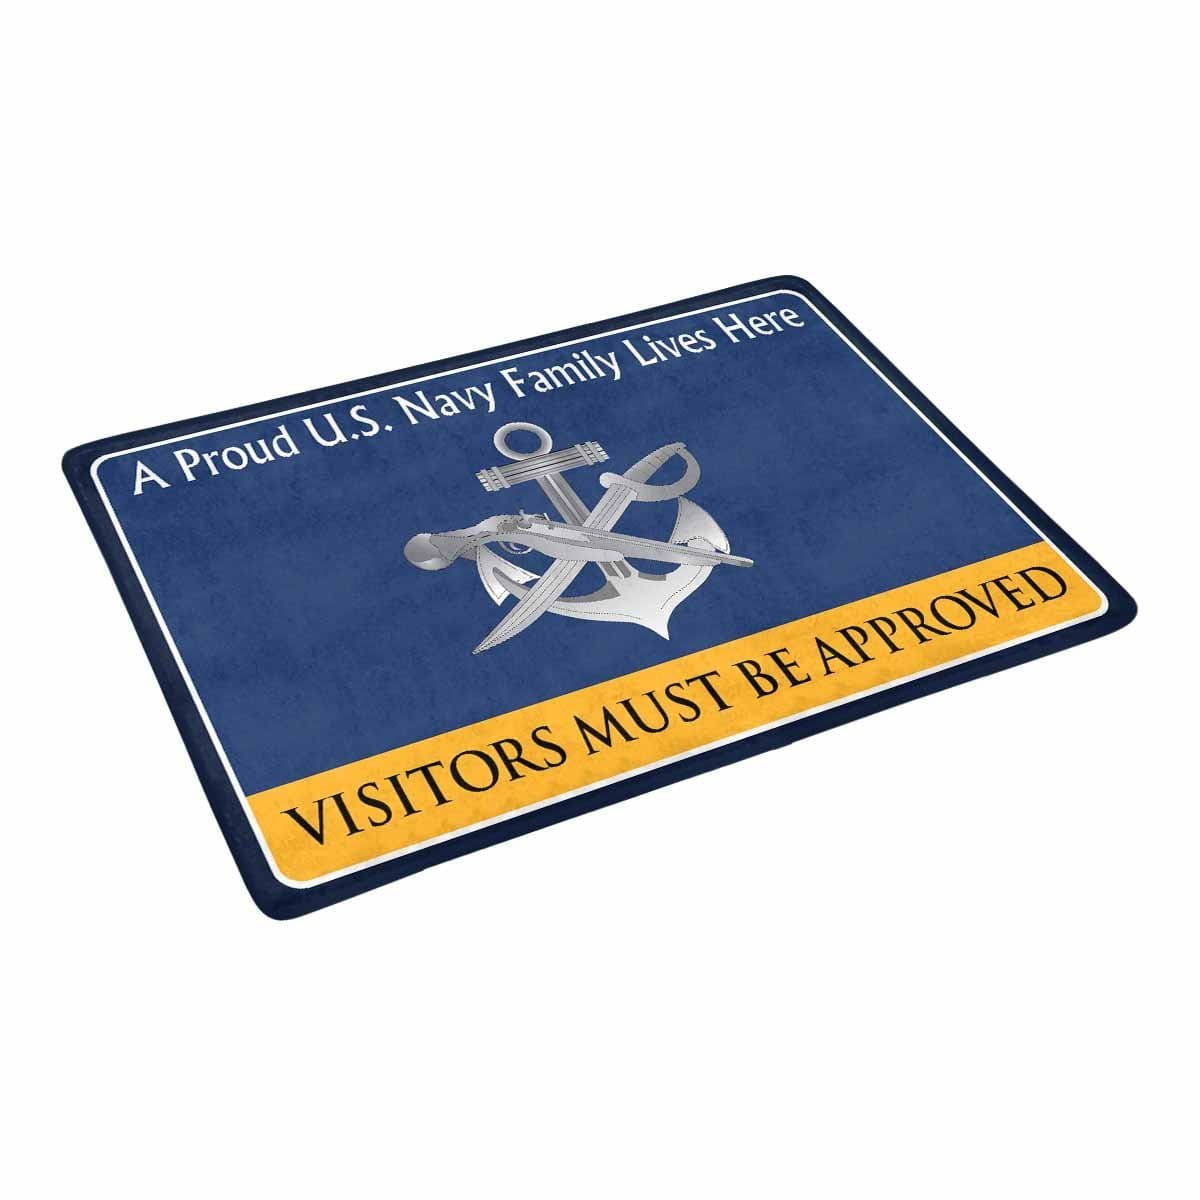 U.S Navy Special Warfare Boat Operator Navy SB Family Doormat - Visitors must be approved (23,6 inches x 15,7 inches)-Doormat-Navy-Rate-Veterans Nation